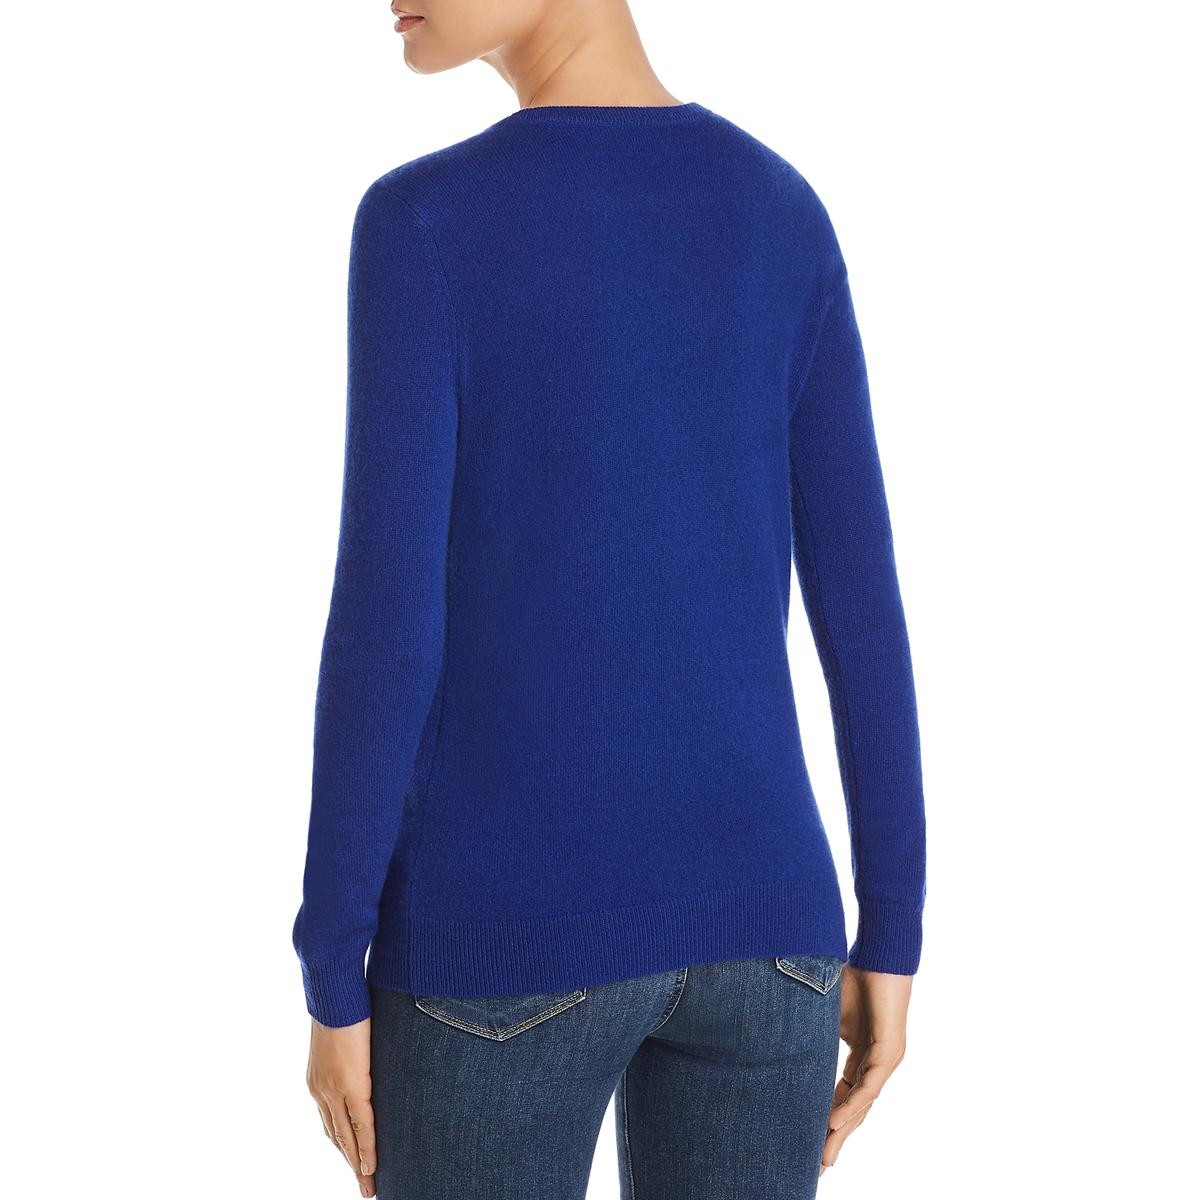 Private Label Womens Cashmere Navy Blue Long Sleeve Sweater Top BHFO ...